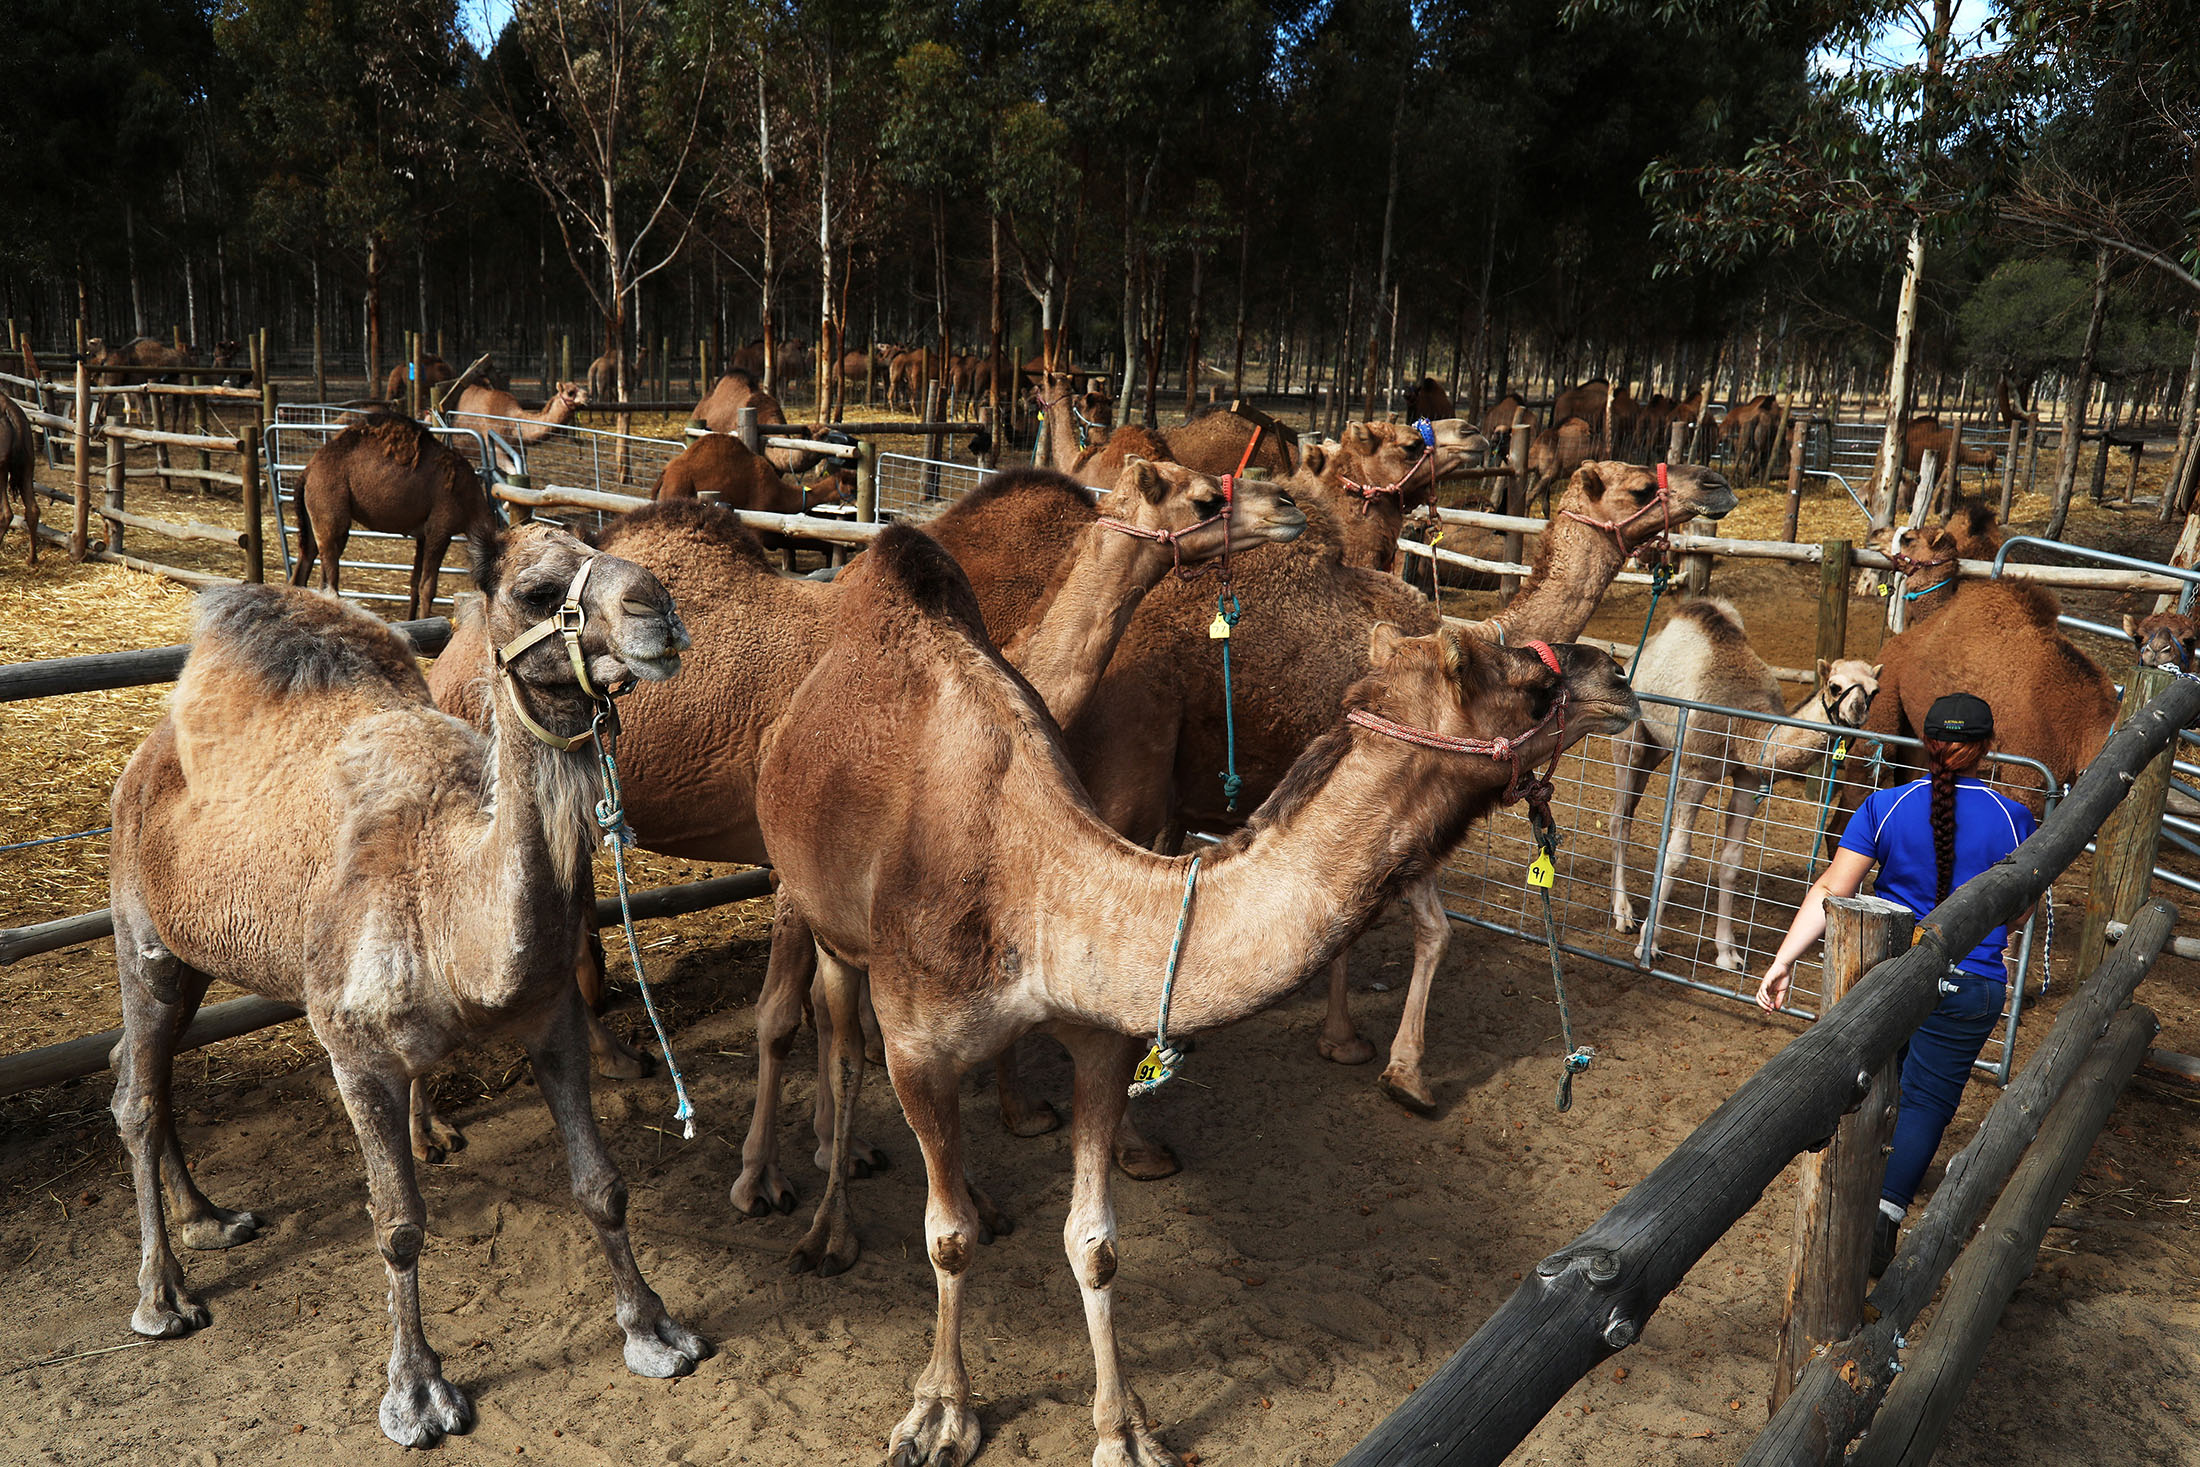 Camels stand in pens at the Good Earth Dairy camel dairy farm in Yathroo, Australia.